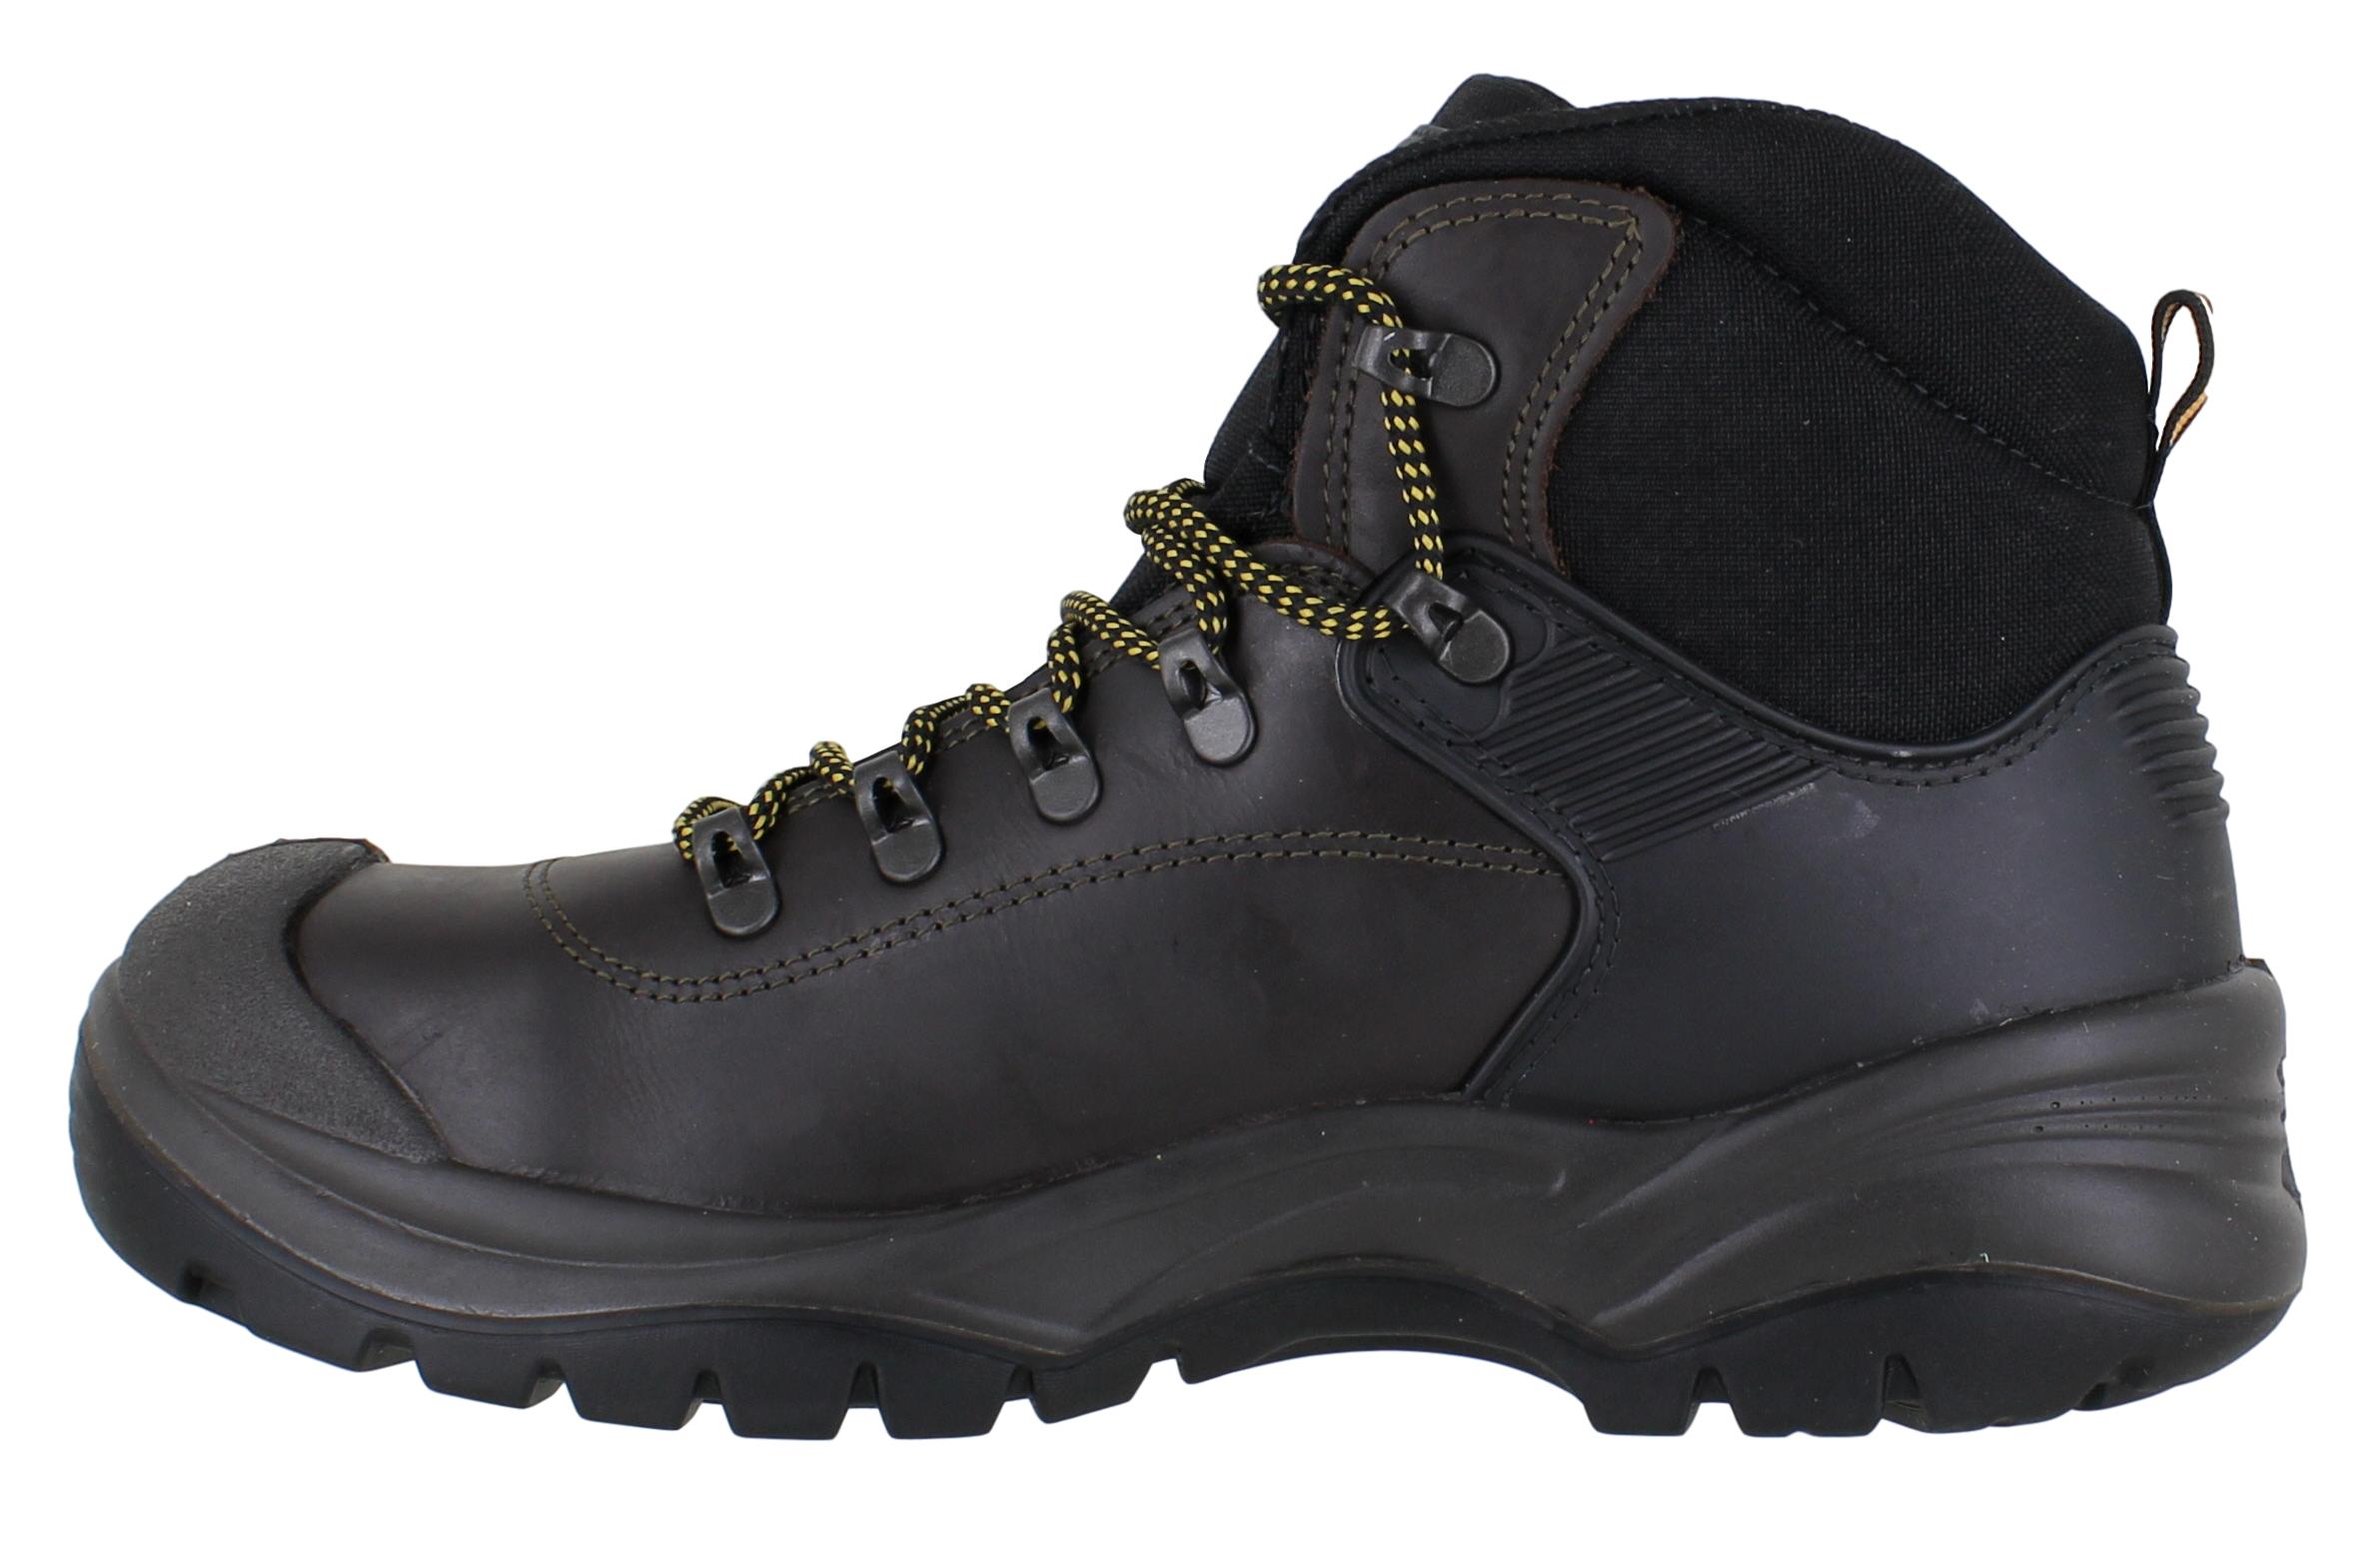 Mens GriSport Contractor S3 Safety Steel Toe/Midsole Work Boots Sizes 7 ...